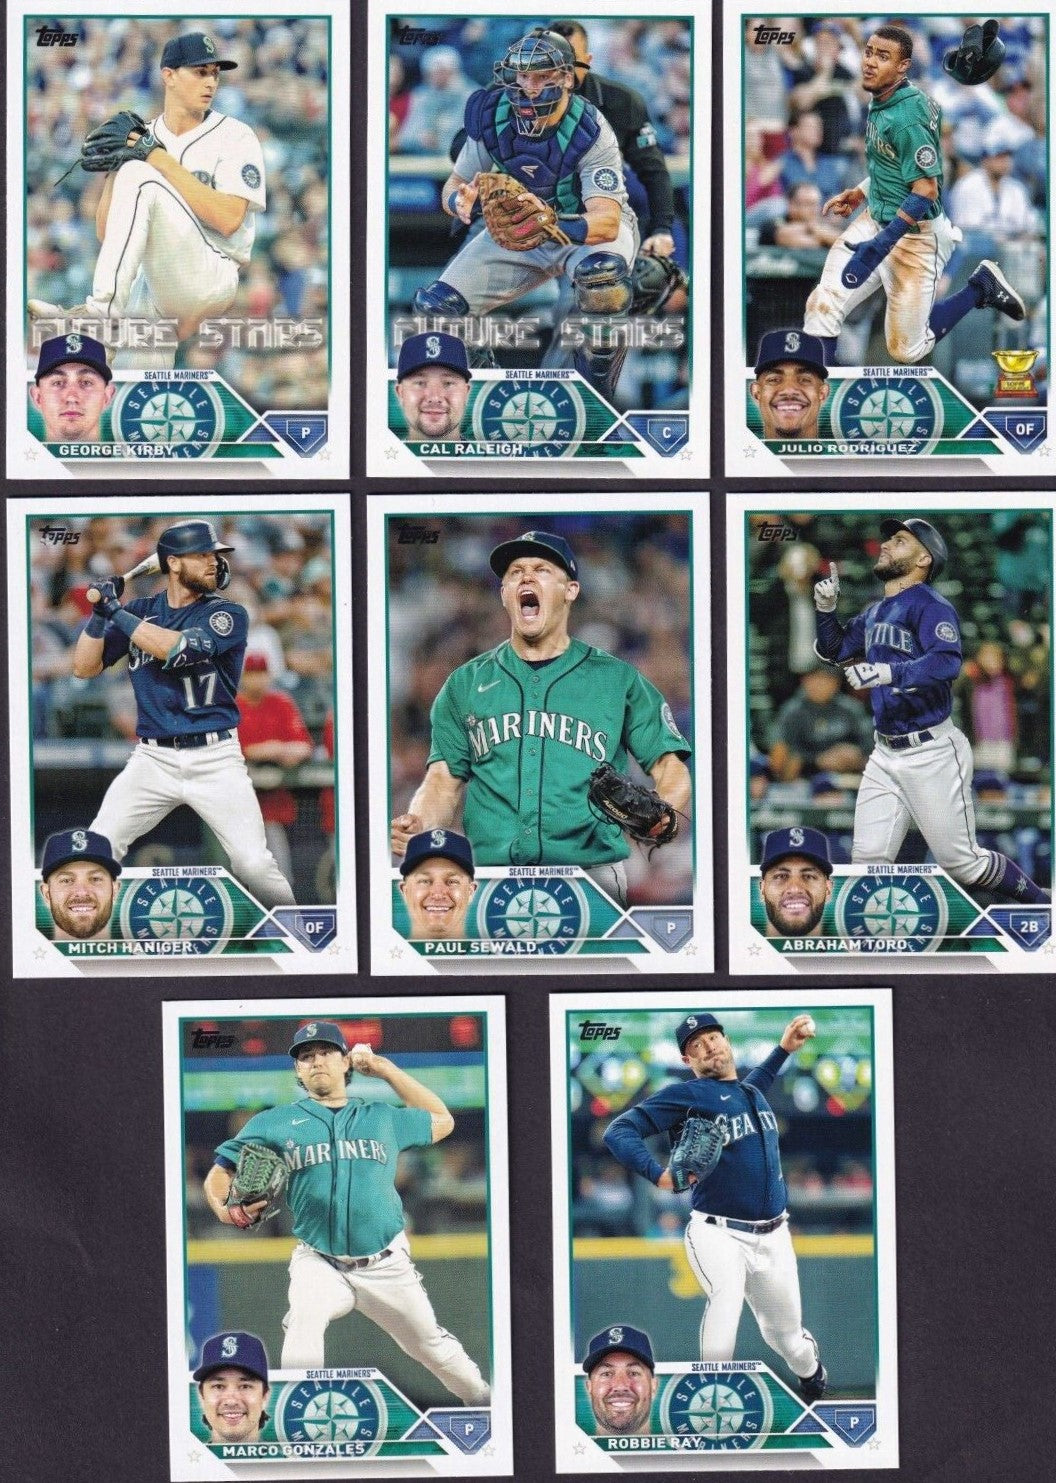 San Diego Padres / 2022 Topps Baseball Team Set (Series 1 and 2) with (20)  Cards. PLUS 2021 Topps Padres Baseball Team Set (Series 1 and 2) with (26)